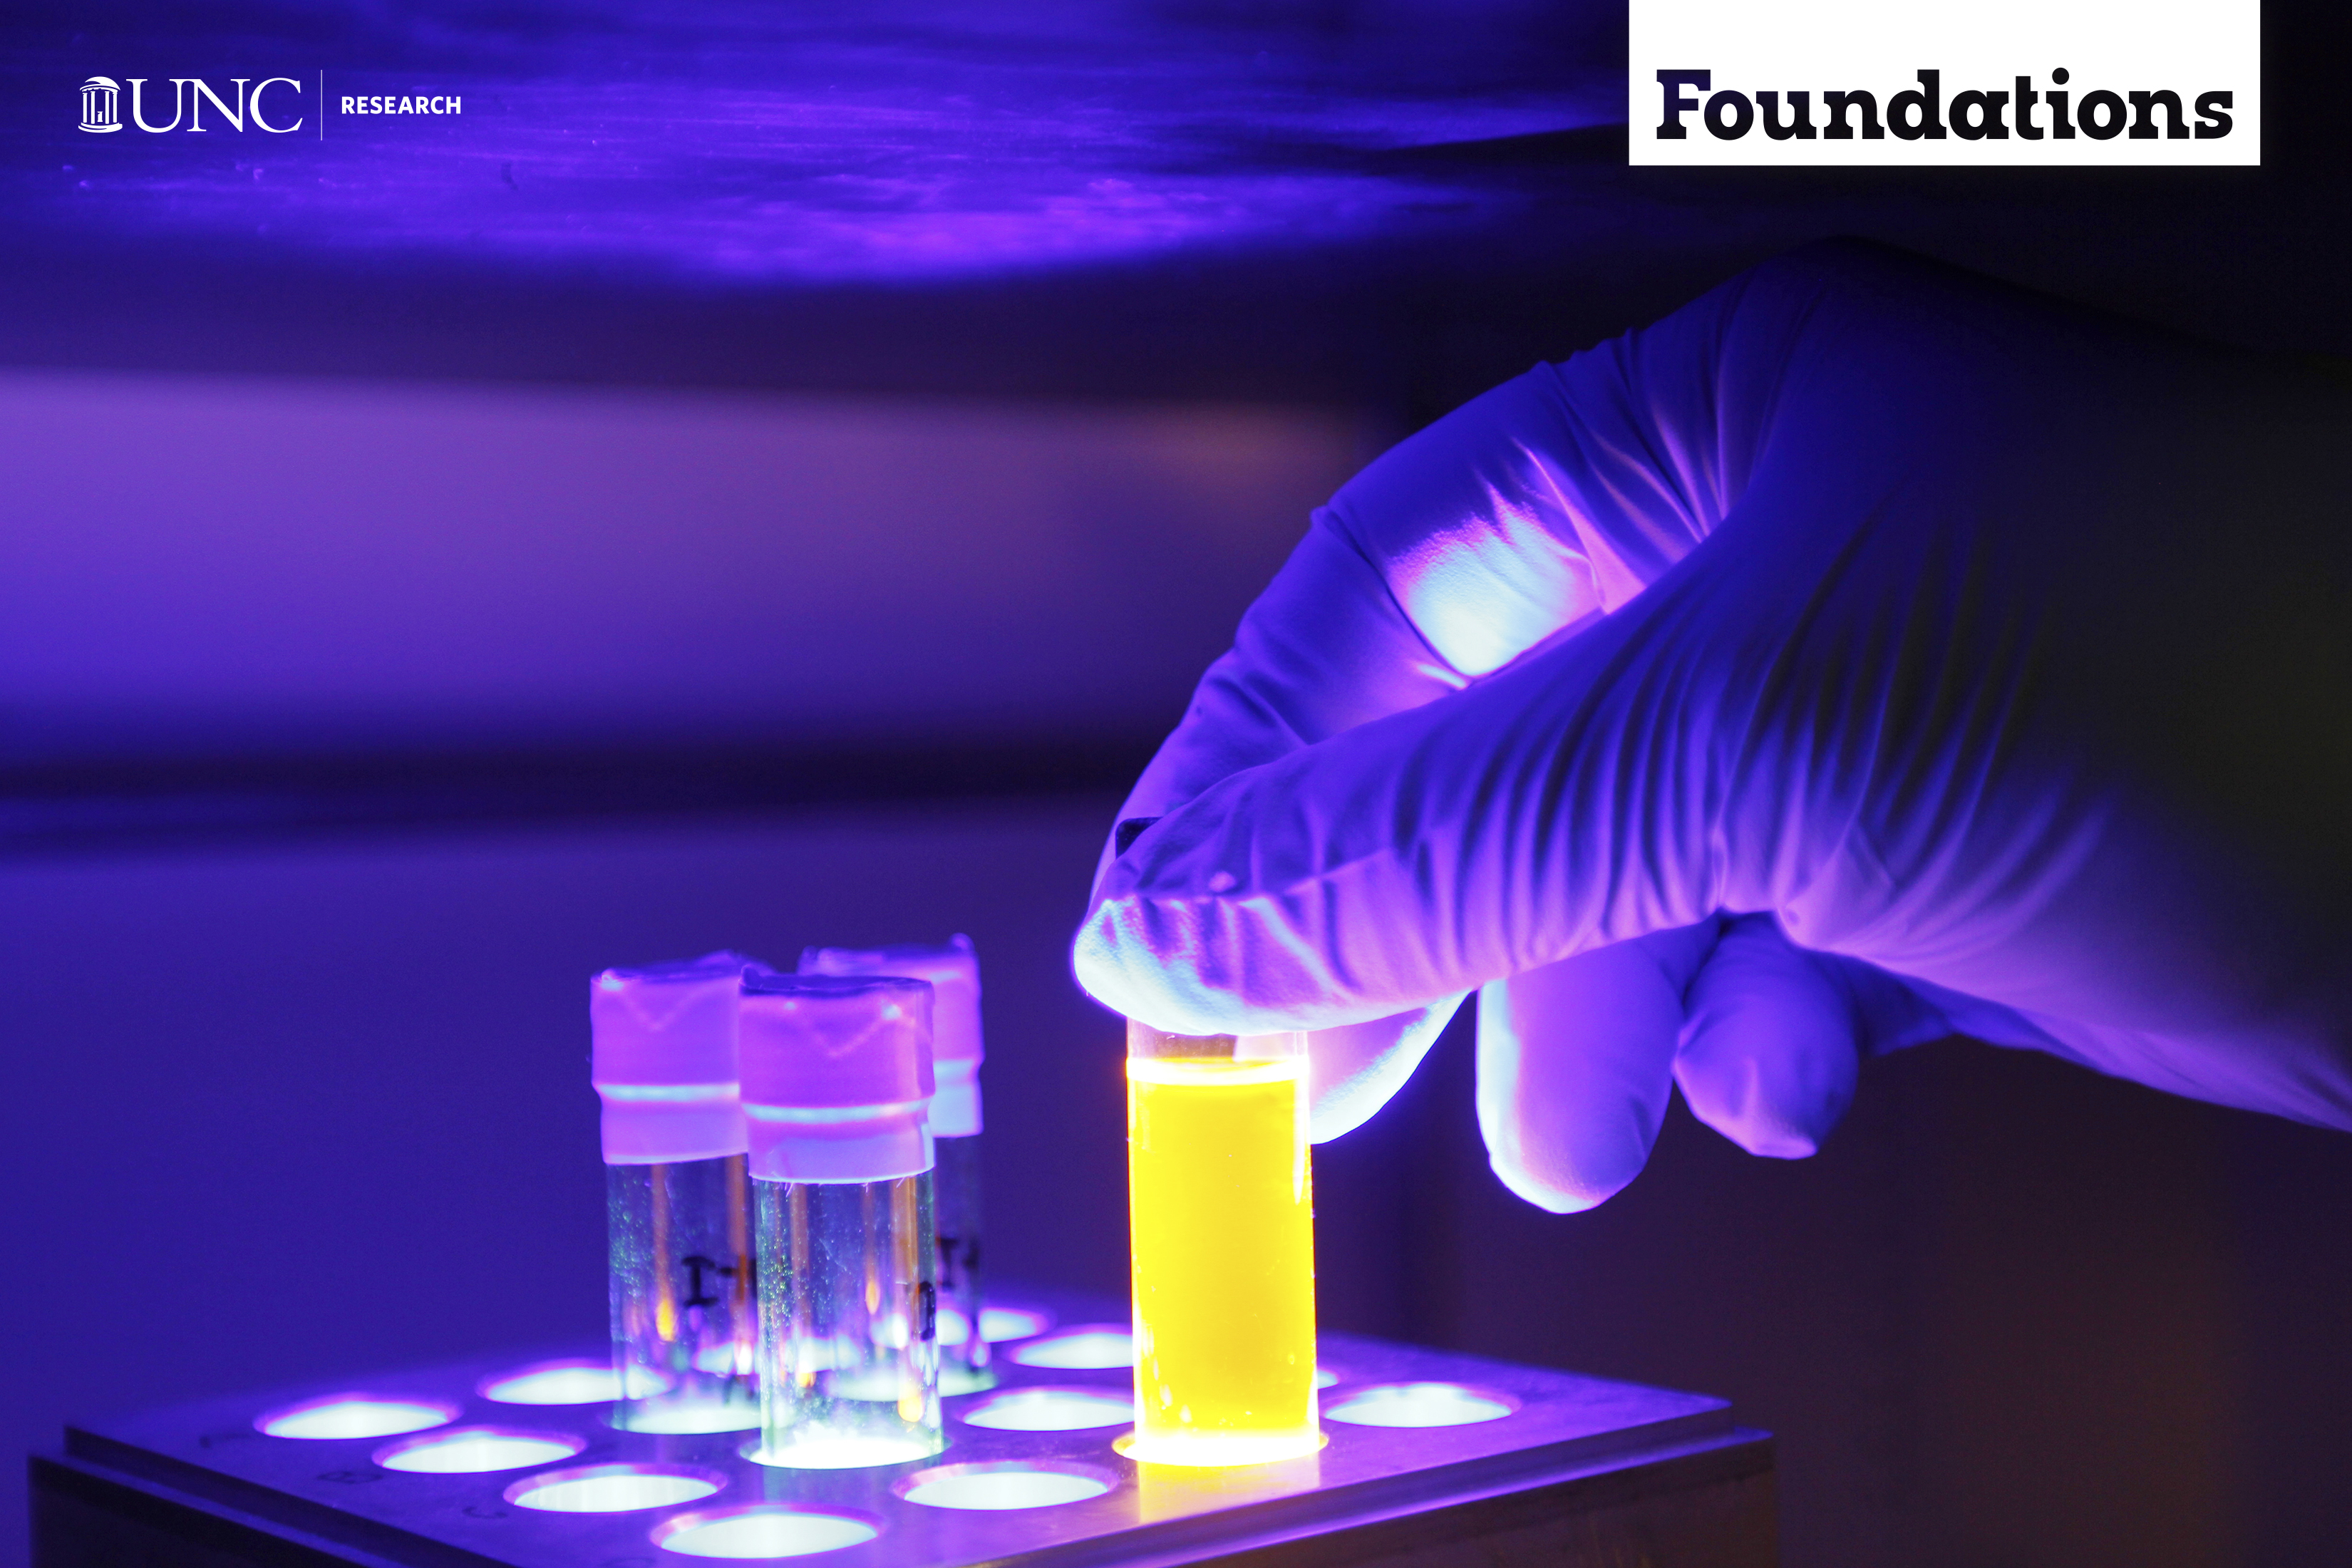 a blacklight makes everything purple while a gloved hand places a test tube full of yellow fluid into a a test tube tray